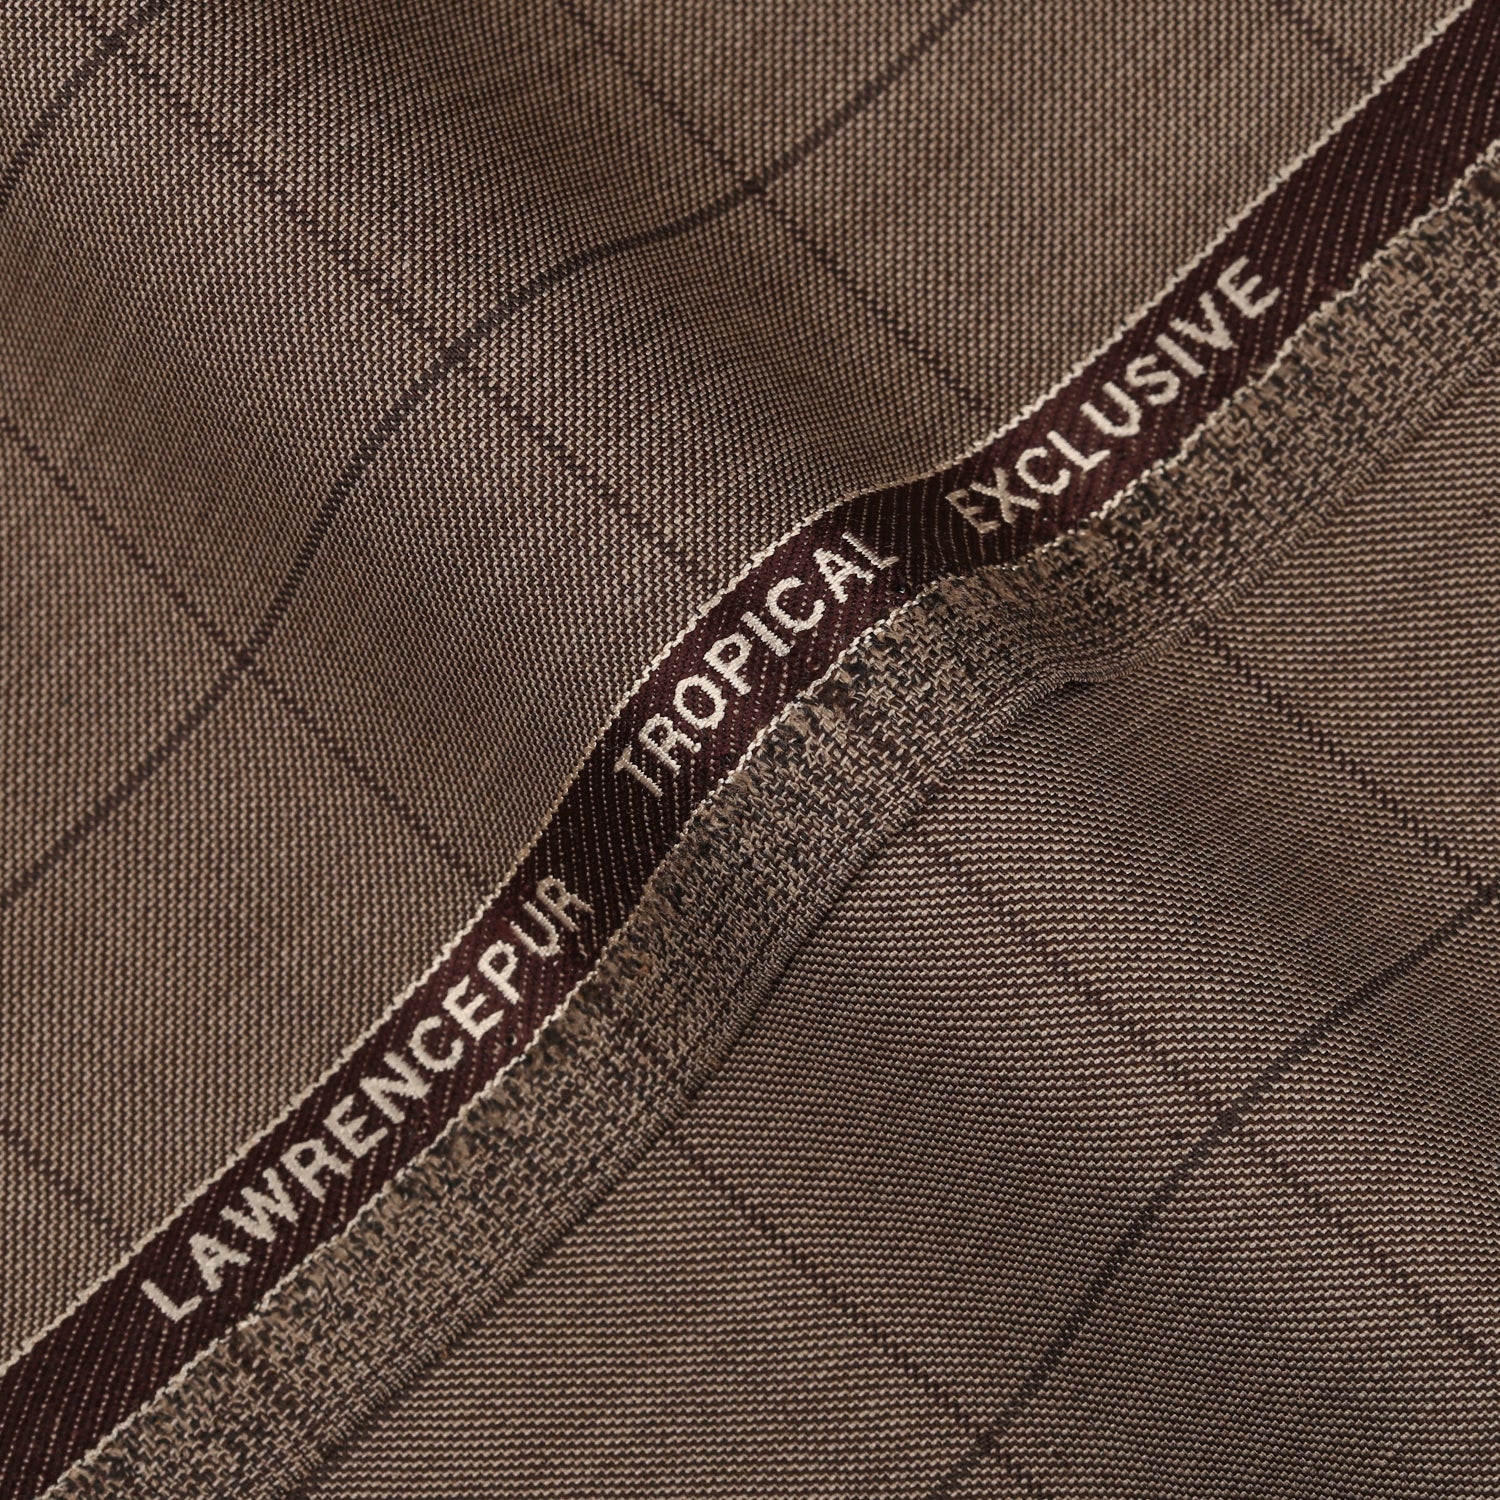 Windowpane Checks-Peanut Brown, Wool Blend, Tropical Exclusive Suiting Fabric